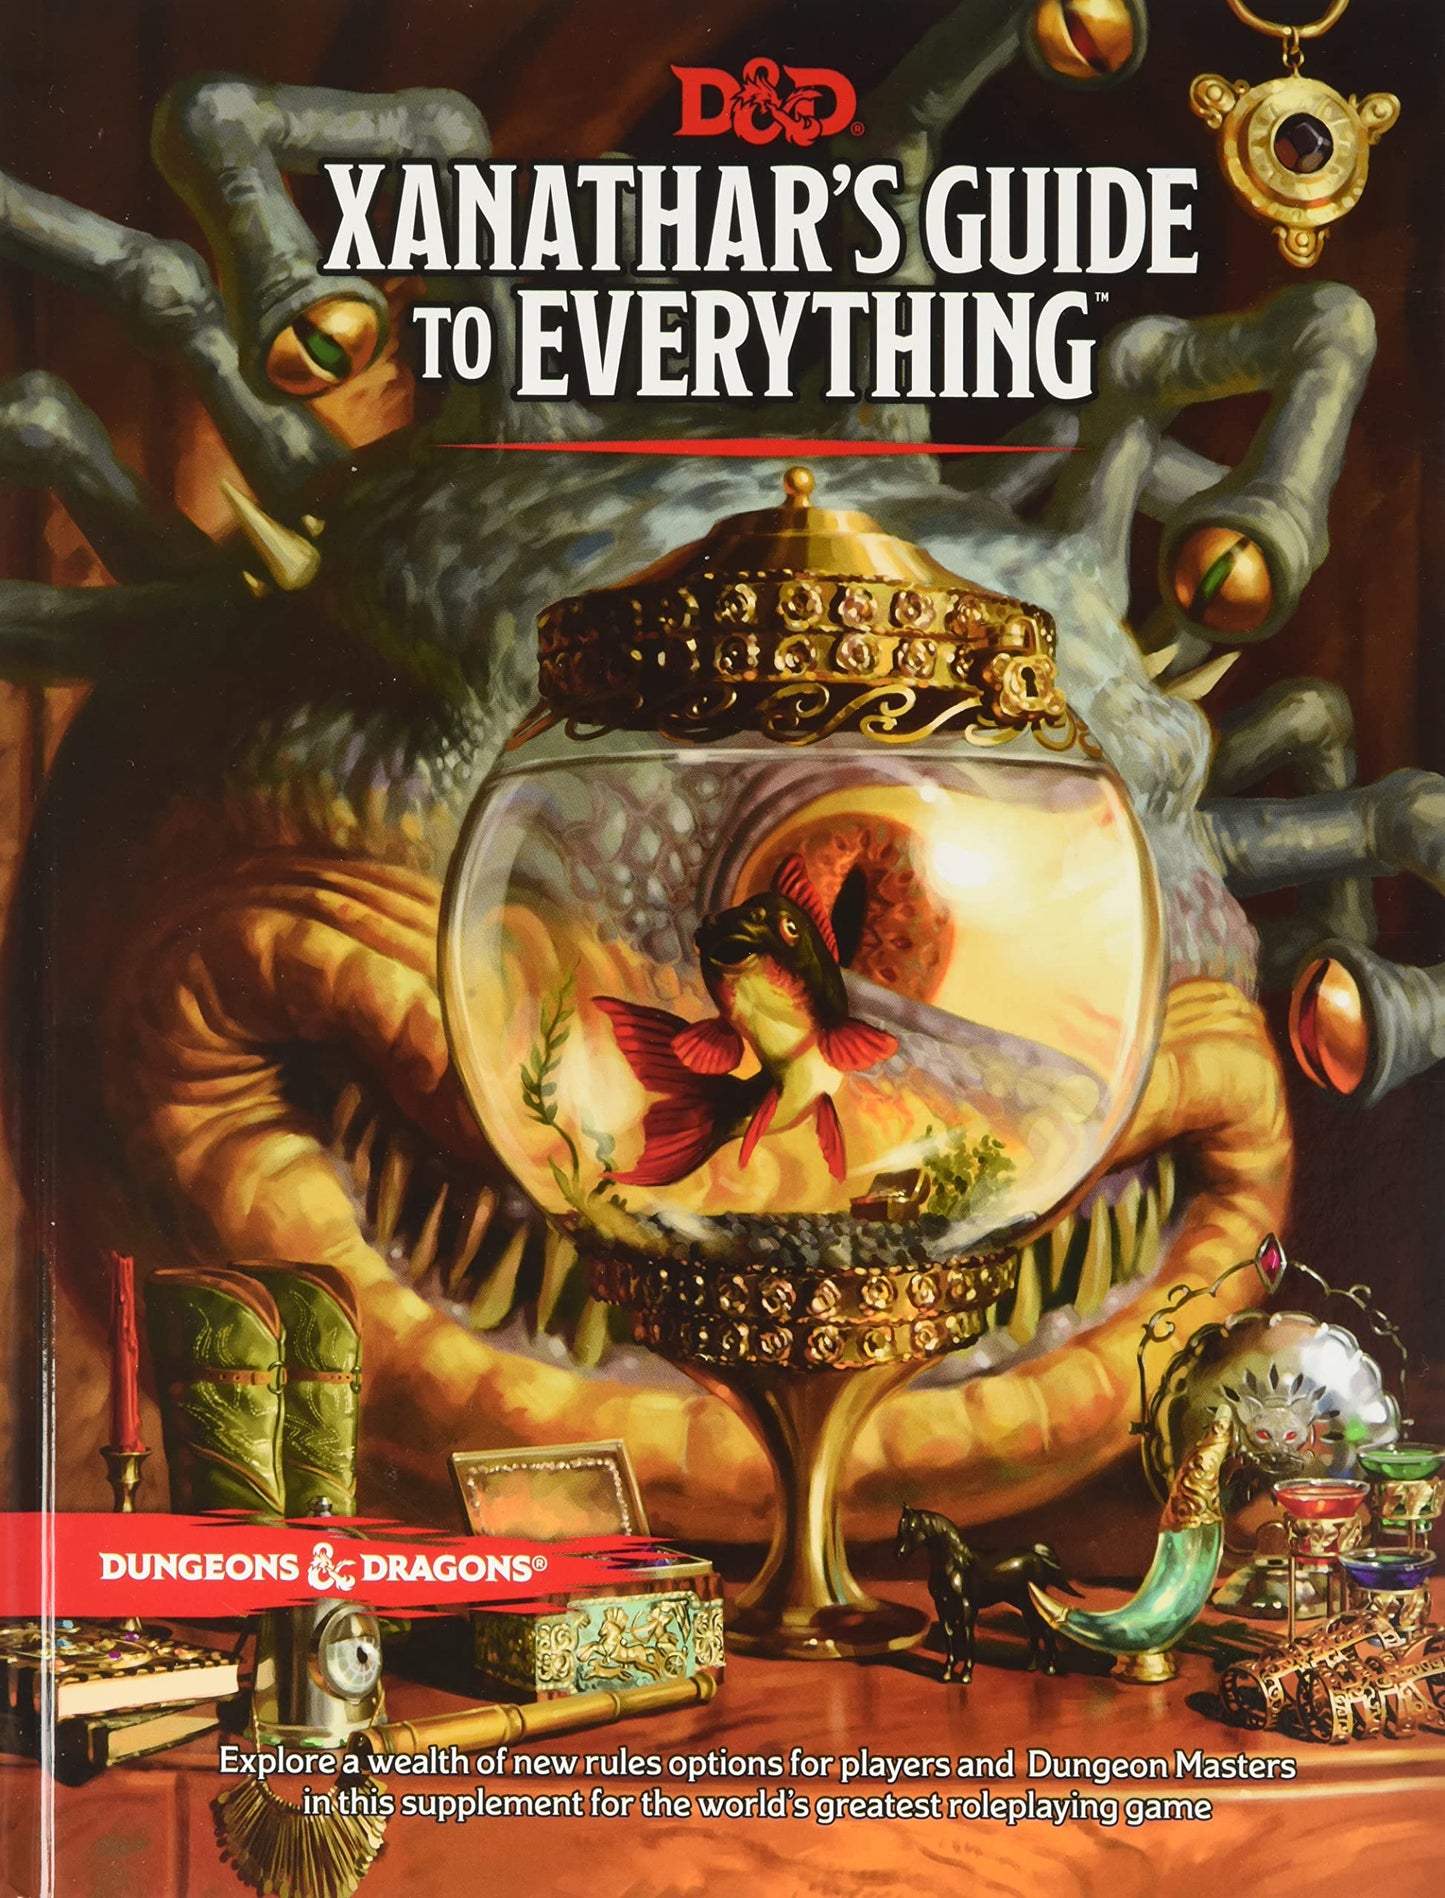 Dungeons & Dragons: Xanathar's guide to everything